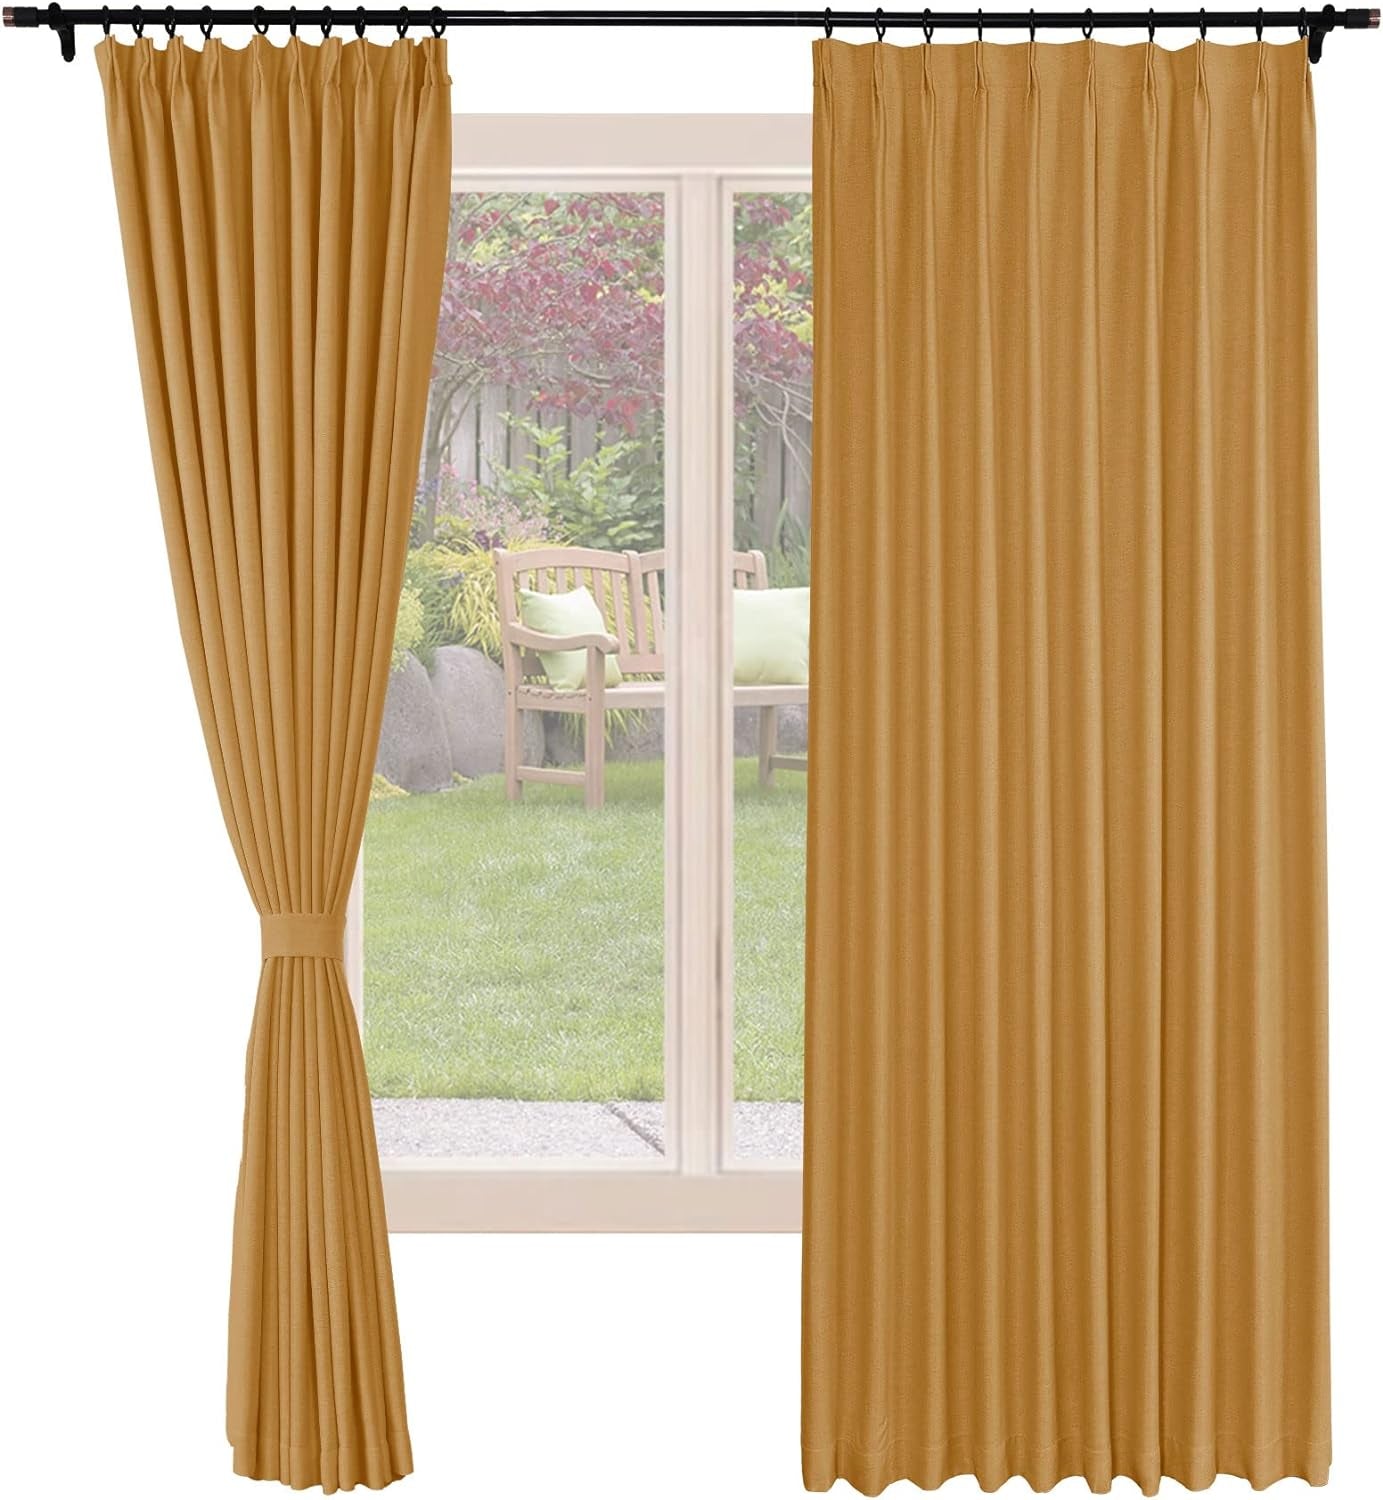 Frelement Blackout Curtains Natural Linen Curtains Pinch Pleat Drapery Panels for Living Room Thermal Insulated Curtains, 52" W X 63" L, 2 Panels, Oasis  Frelement 22 Orange (100Wx84L Inch)*2 